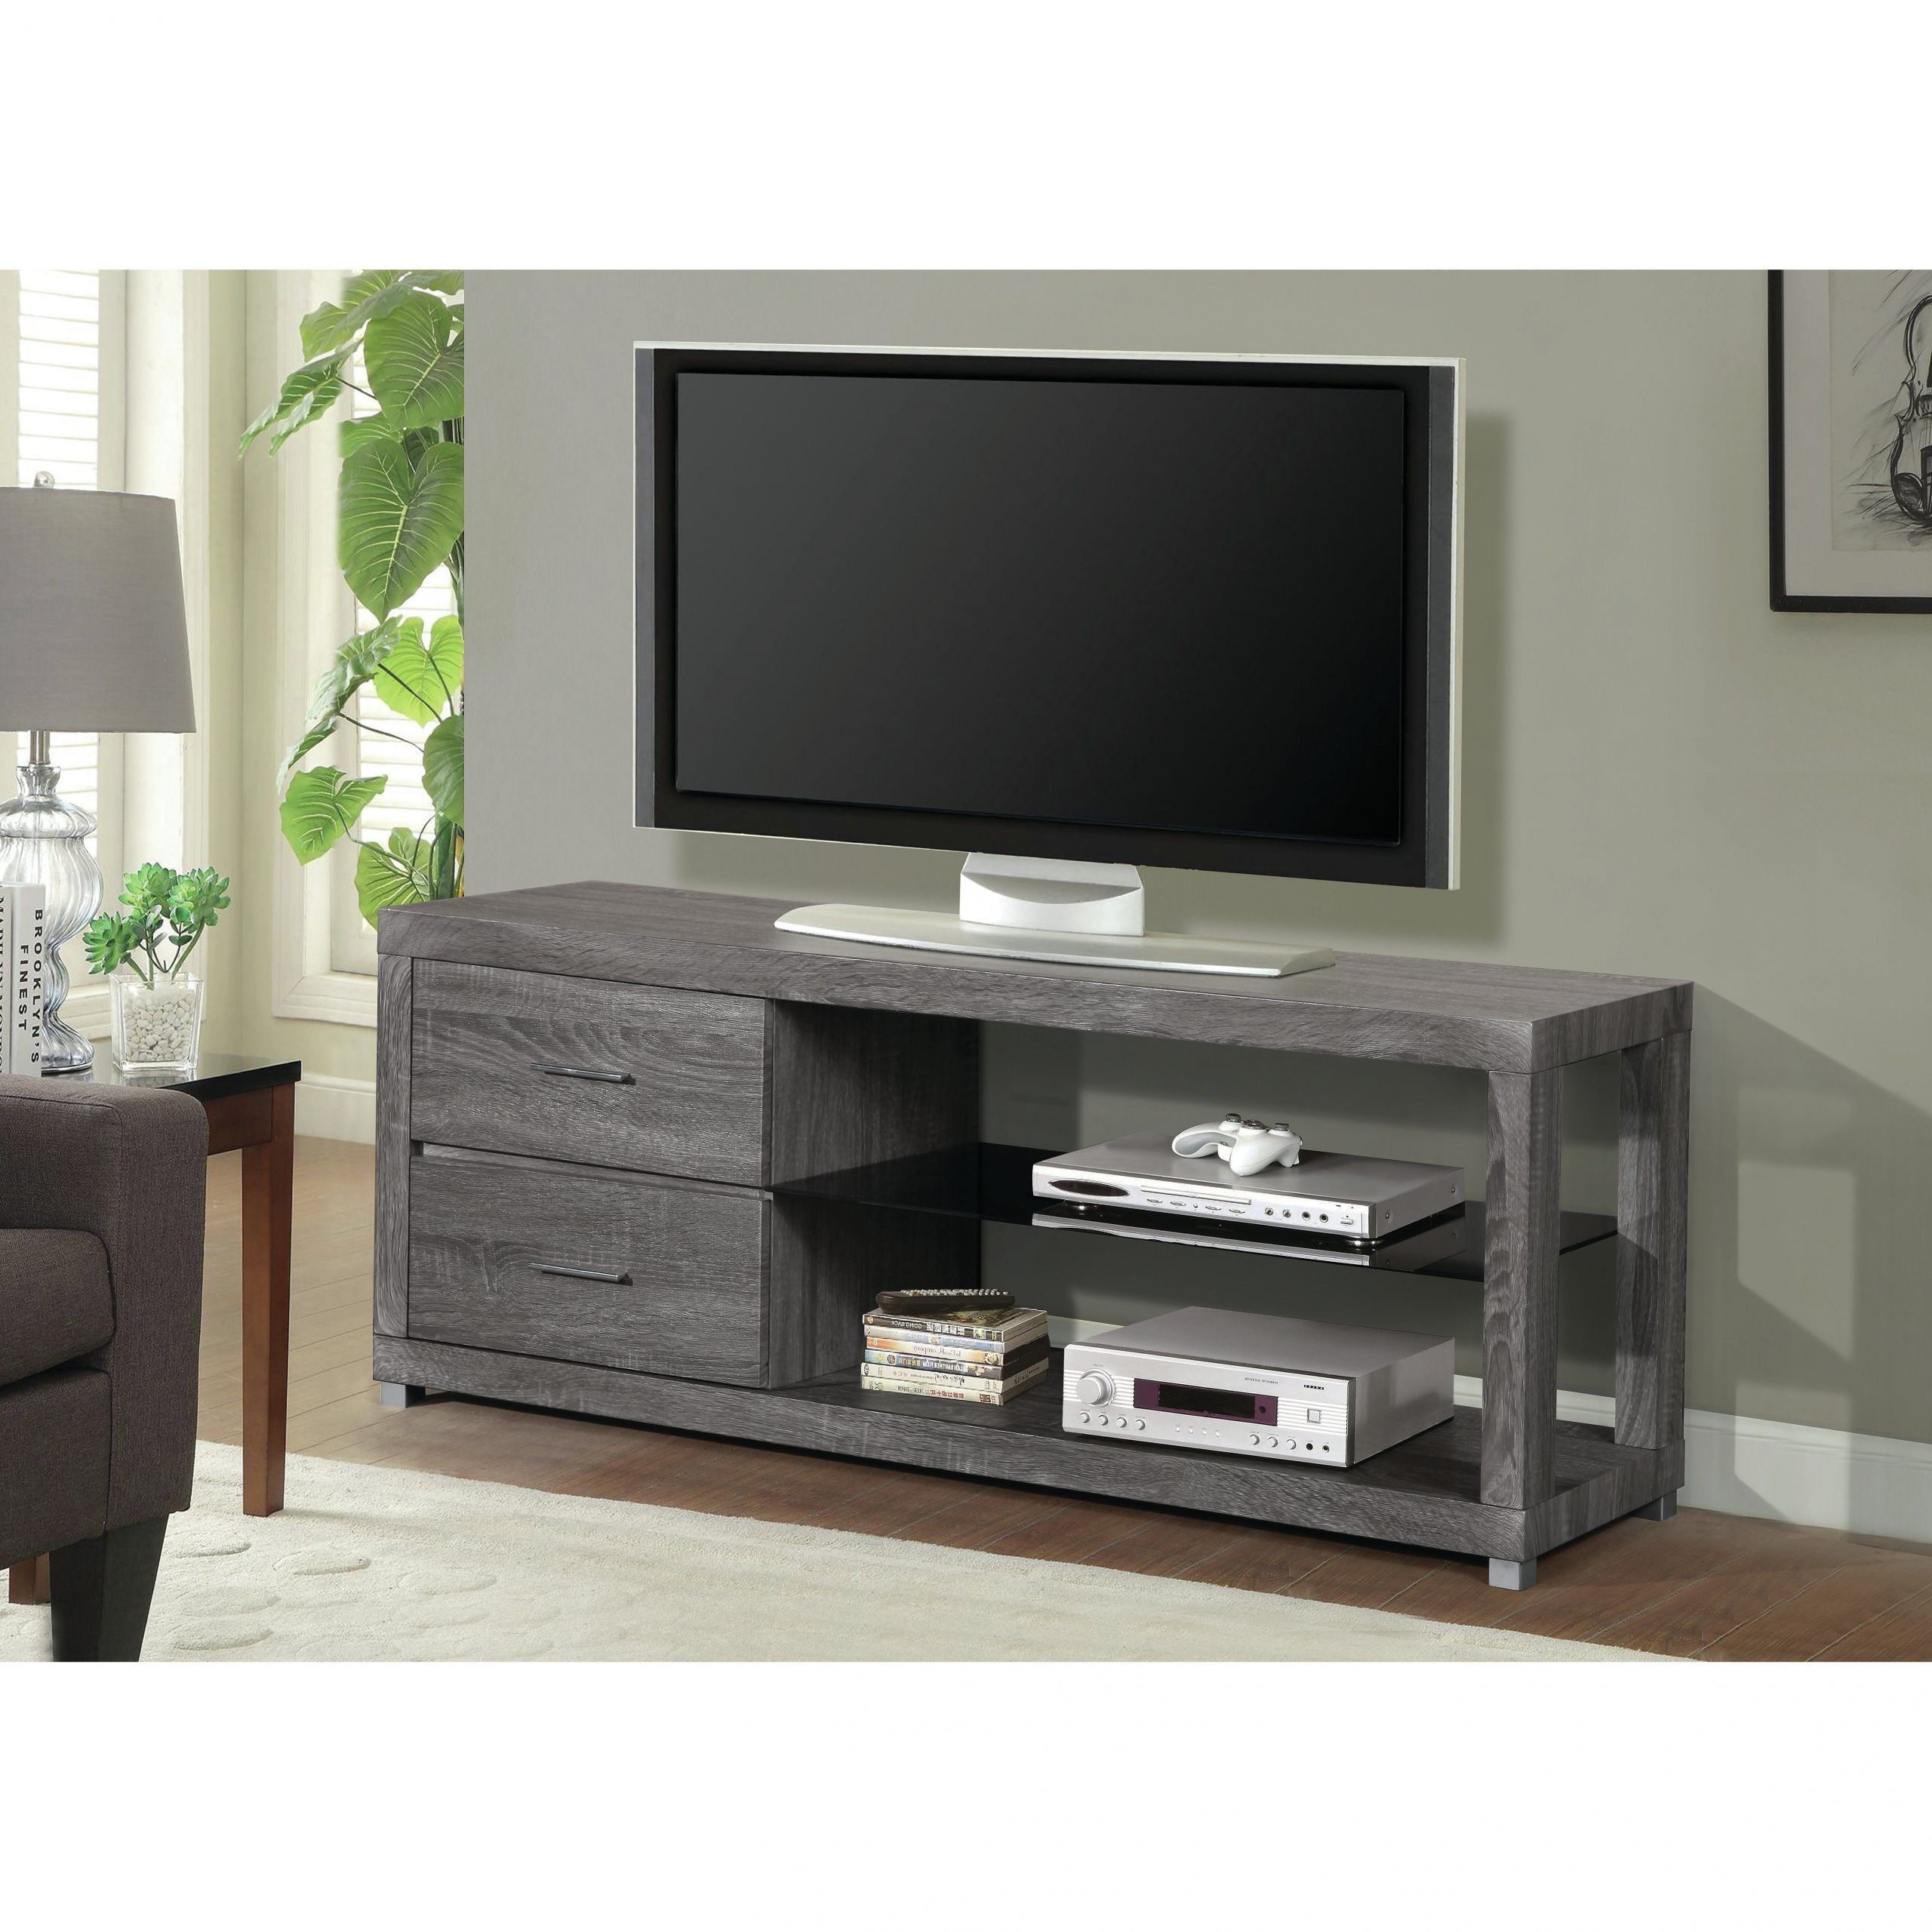 Wade Logan® Stockwood Tv Stand | Tv Stand With Storage, Tv Pertaining To Logan Tv Stands (View 1 of 20)